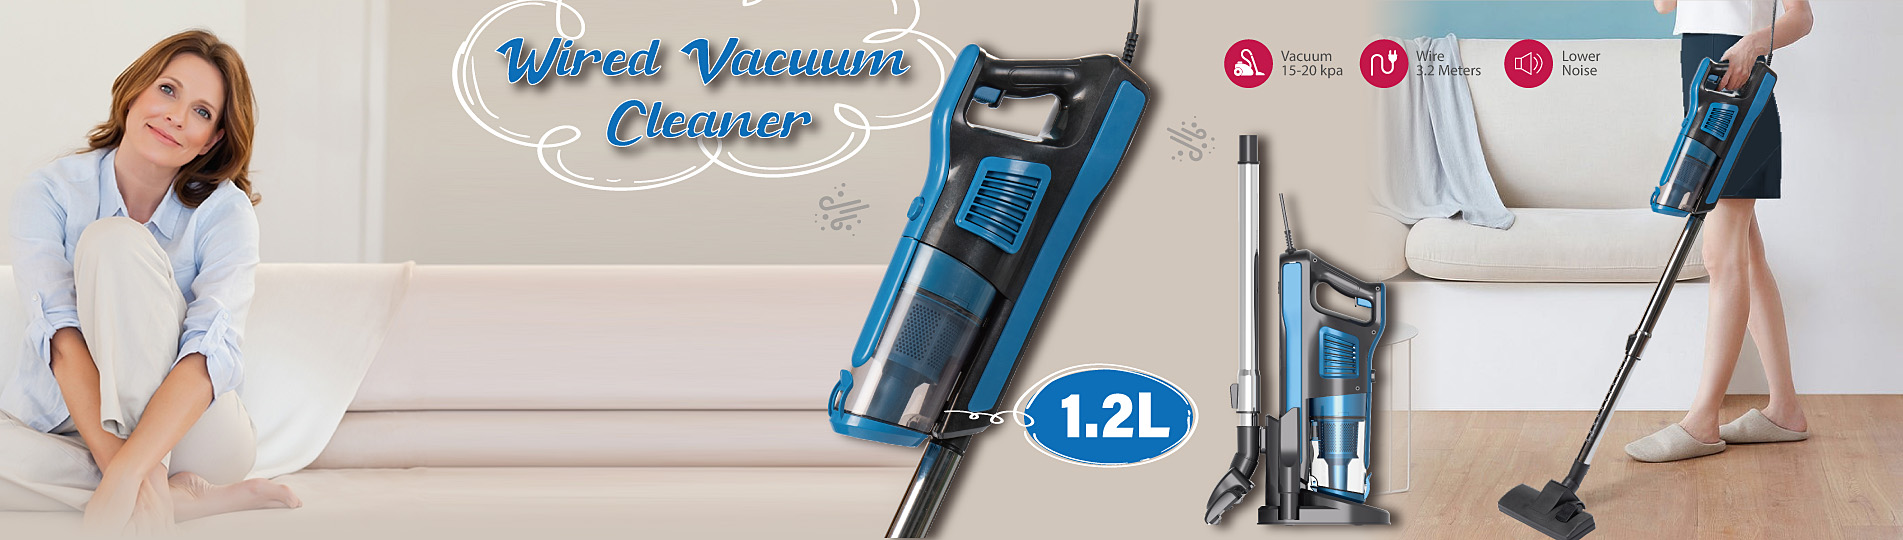 wired vacuum cleaner